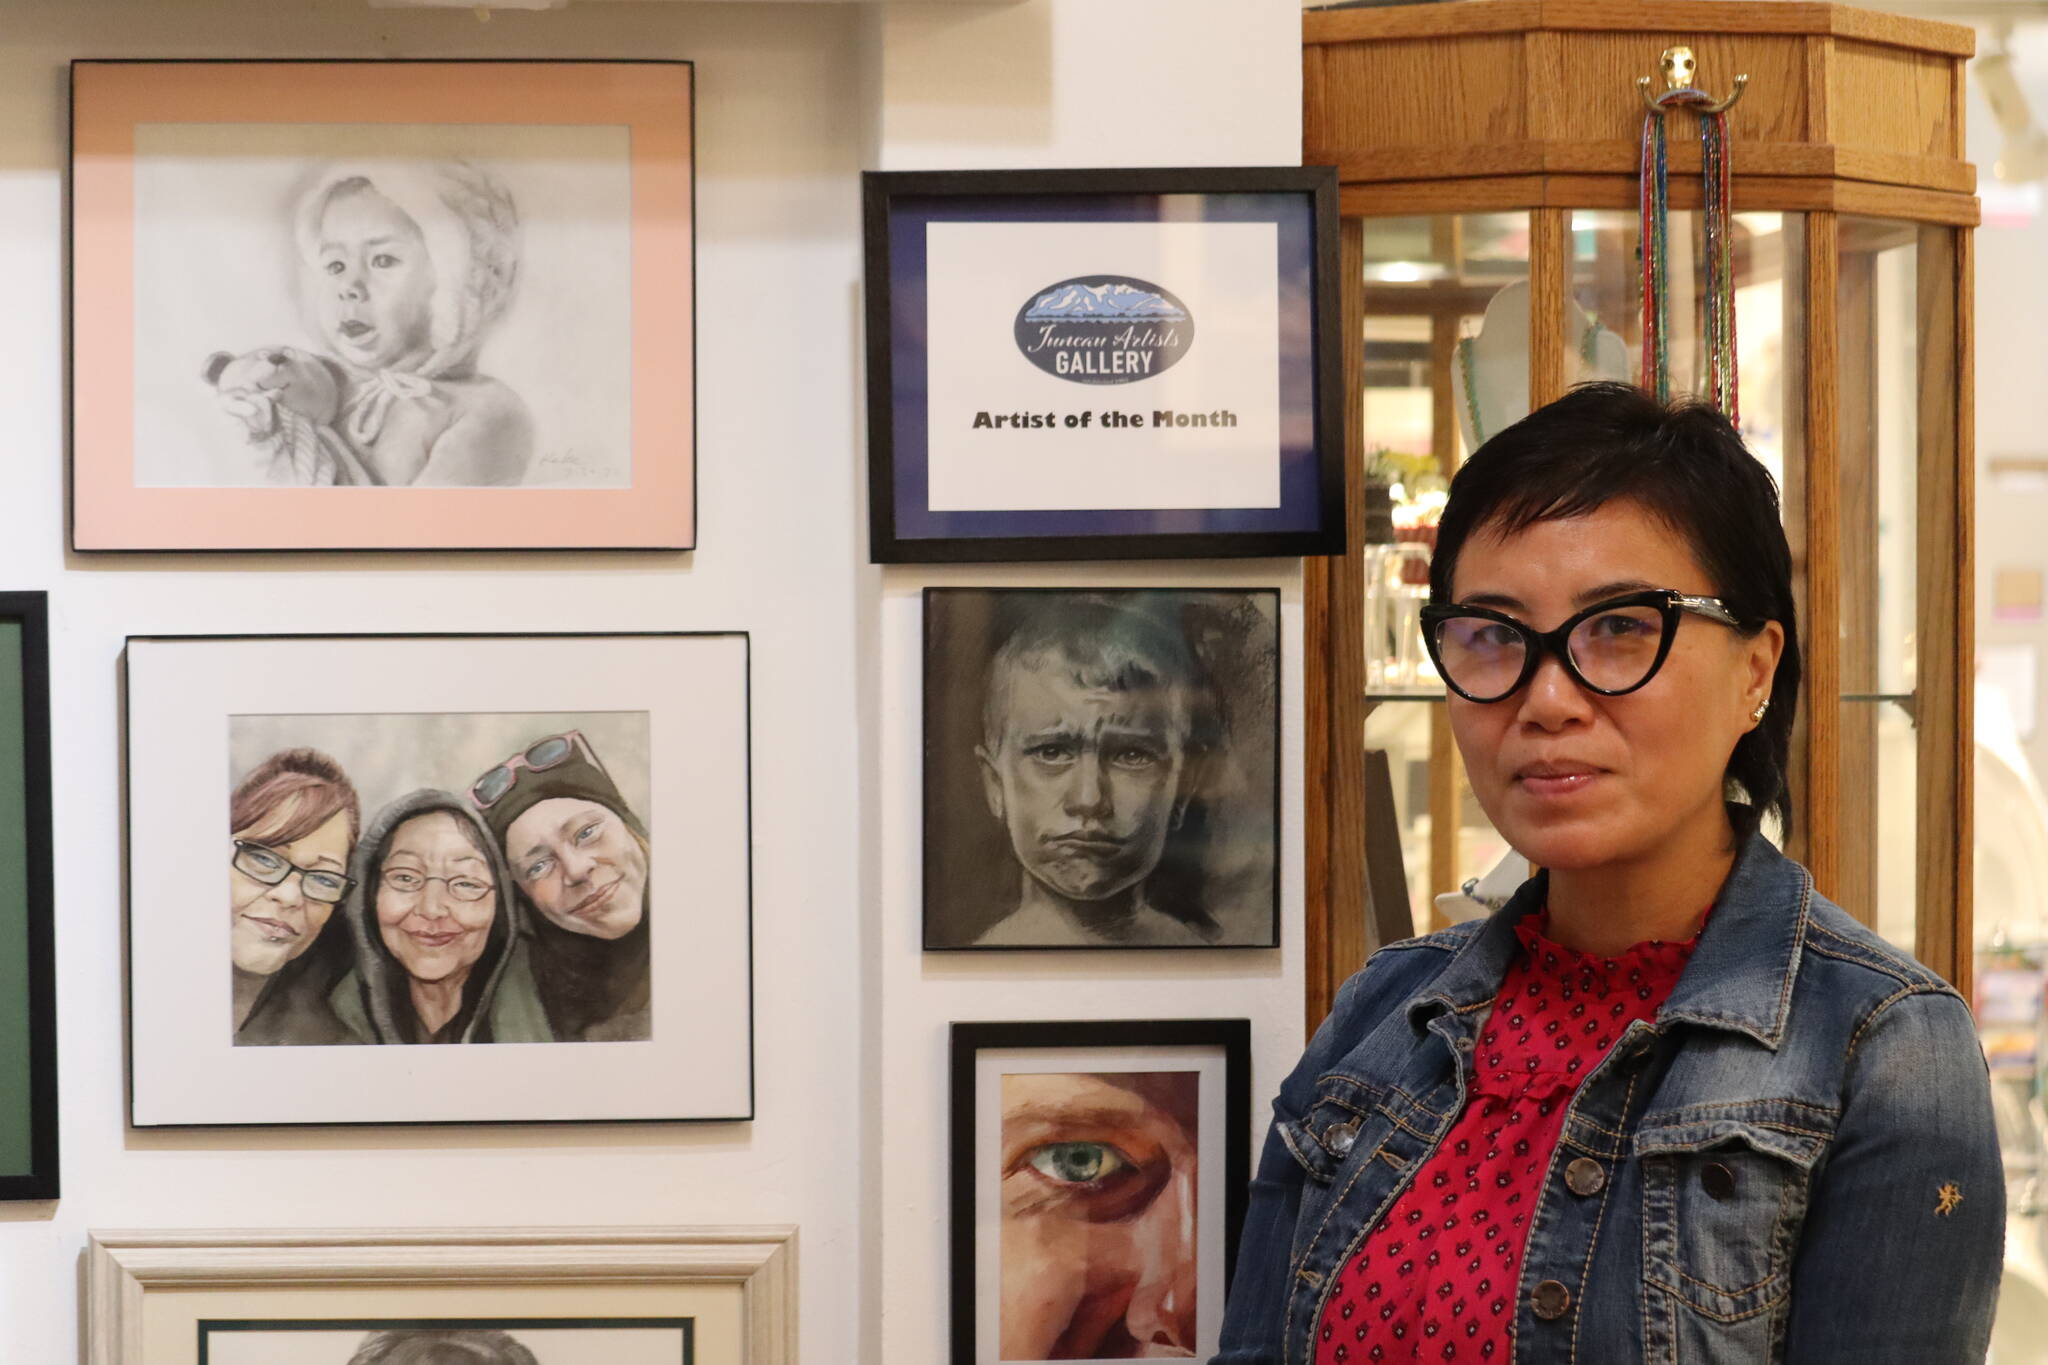 Keke Tian Ke featured in this photo on First Friday next to her work which is on display at the Juneau Artist Gallery located at 175 S. Franklin St. Ke is the gallery’s artist of the month. (Jonson Kuhn / Juneau Empire)